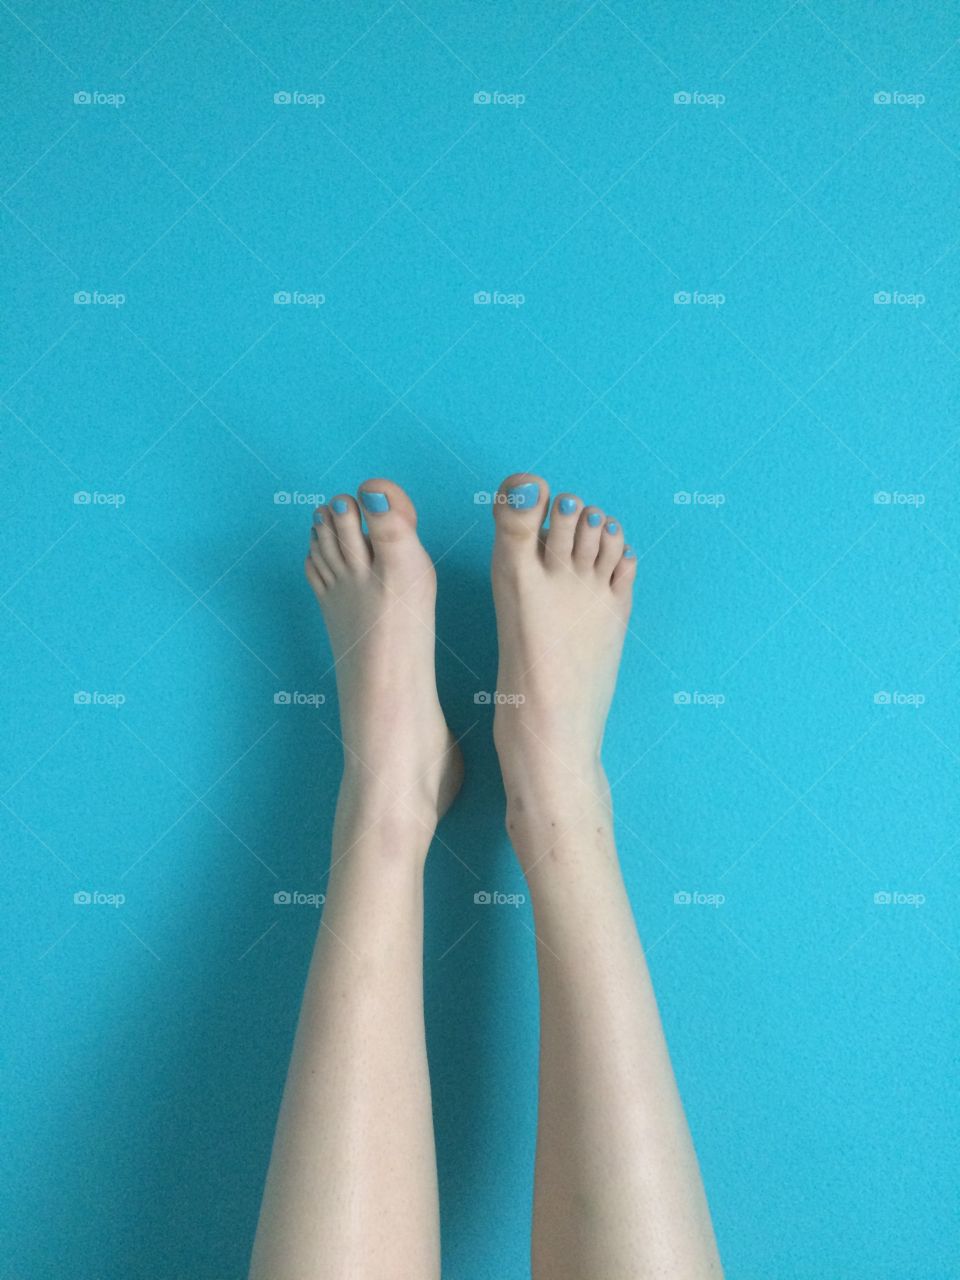 Feet with blue painted toes on a blue wall.